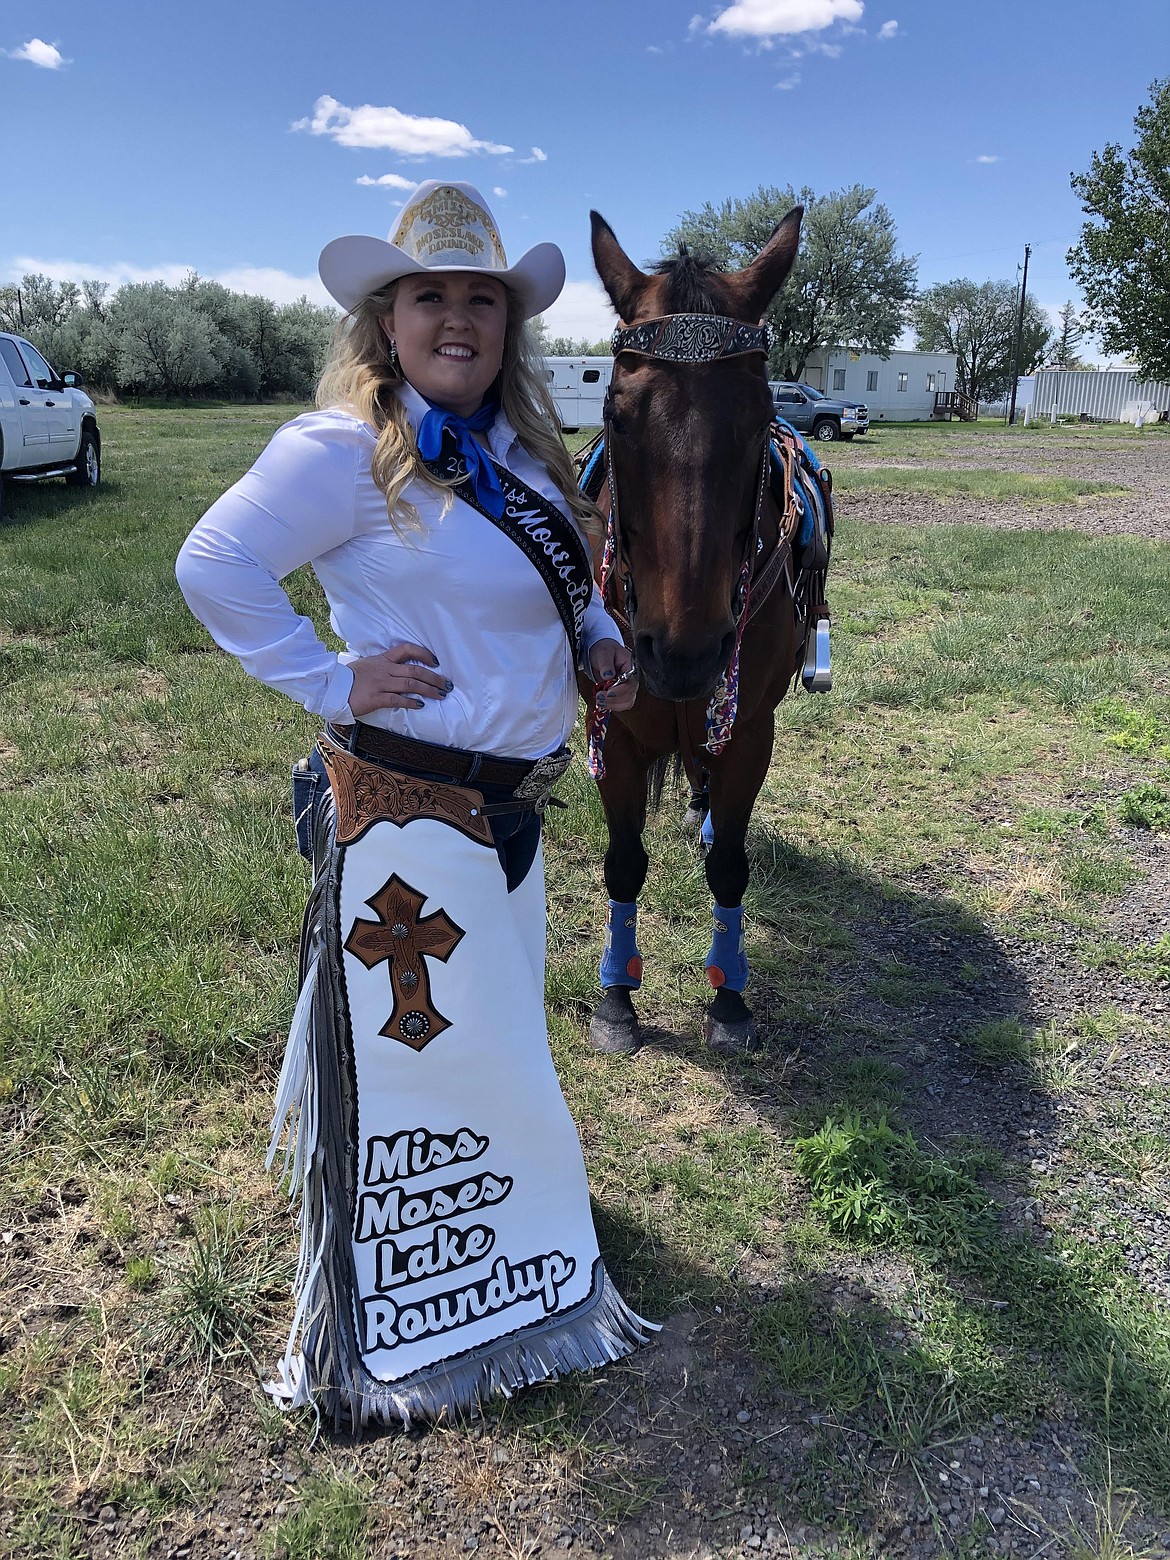 Courtesy photo

Moses Lake Roundup Queen Mykiah Hollebeck with her horse prior to an event. The coronavirus outbreak has led the cancellation of a number of events in 2020, but Hollenbeck said rodeo participants are making the best of the circumstances.